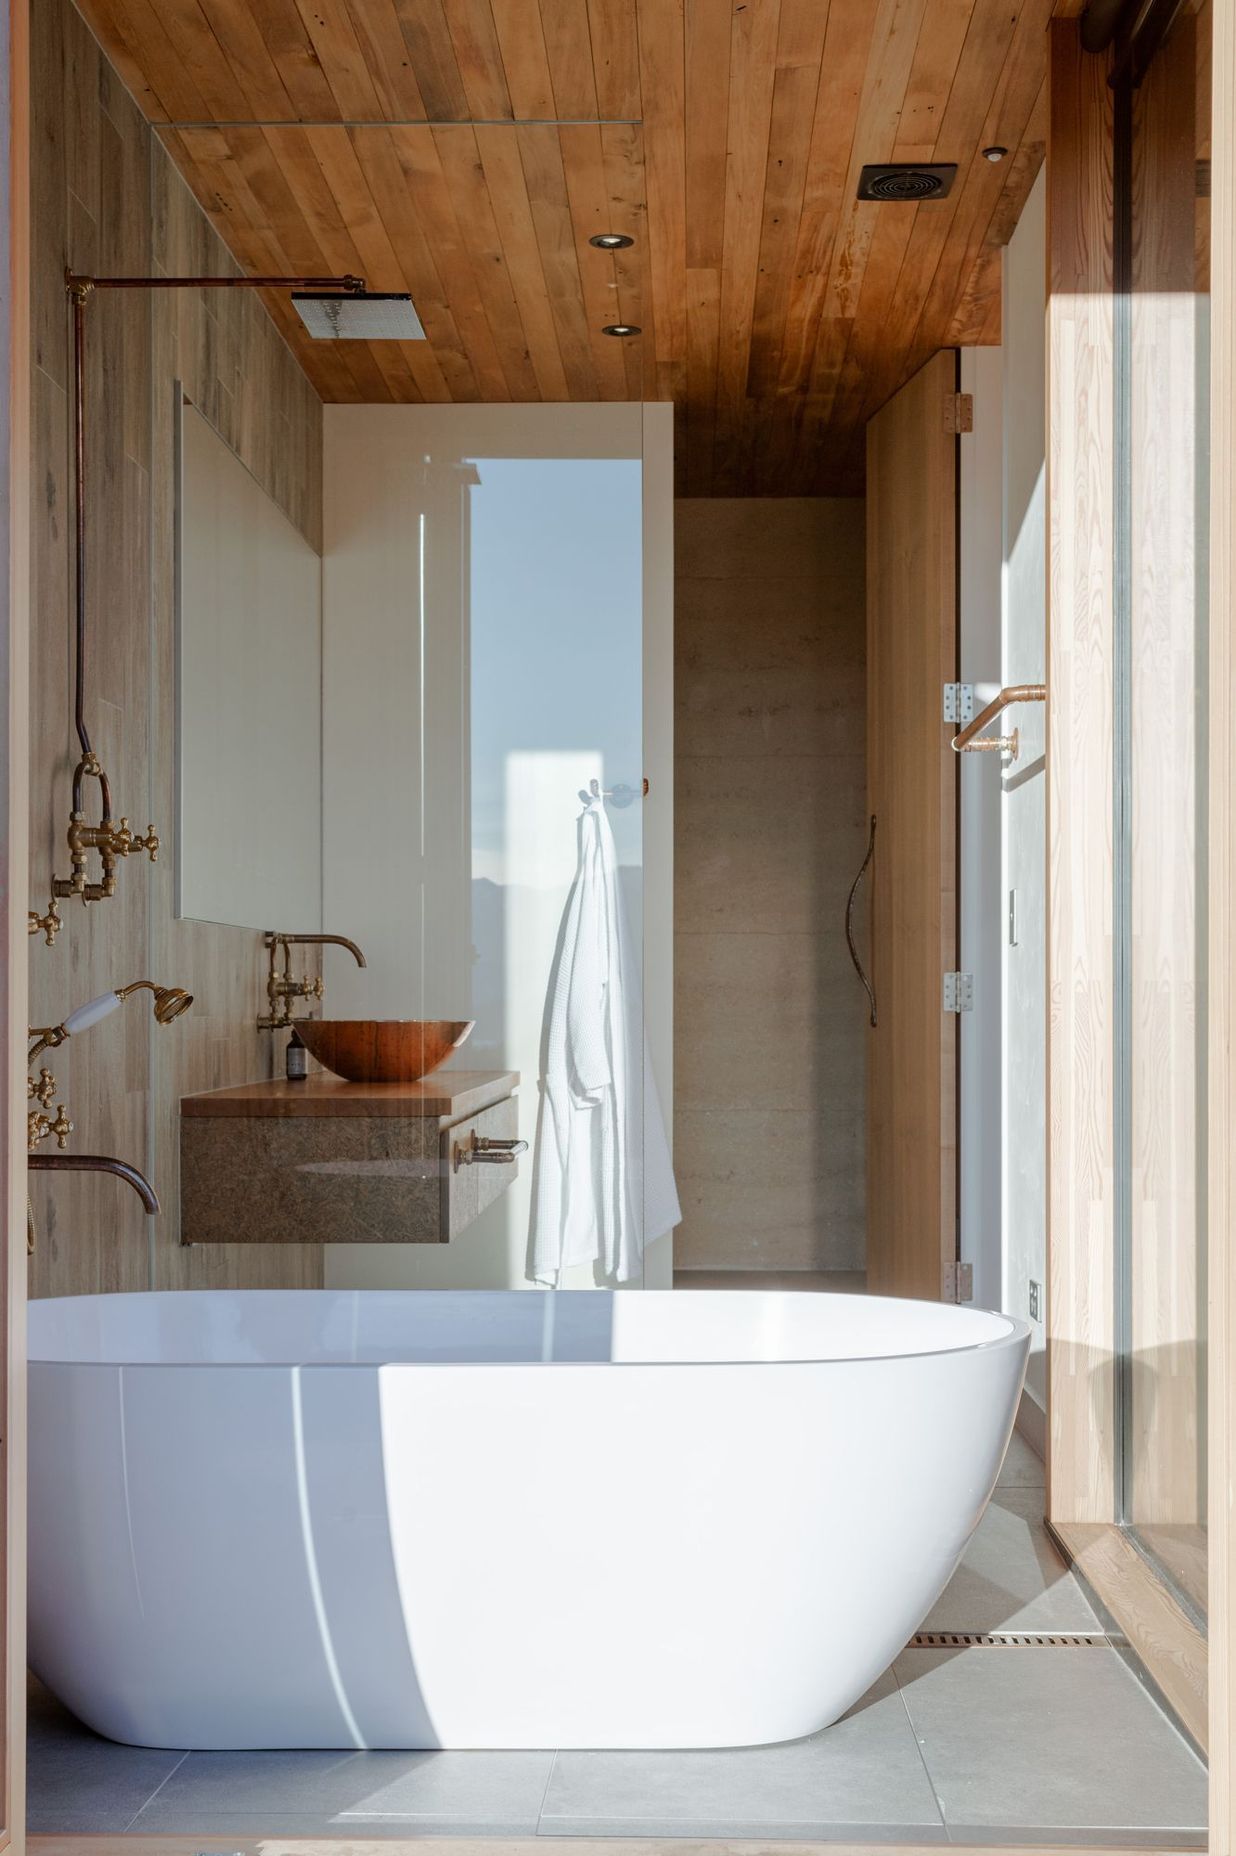 The free-standing bath sits within its own enclave with bifolding doors that open directly to the deck.